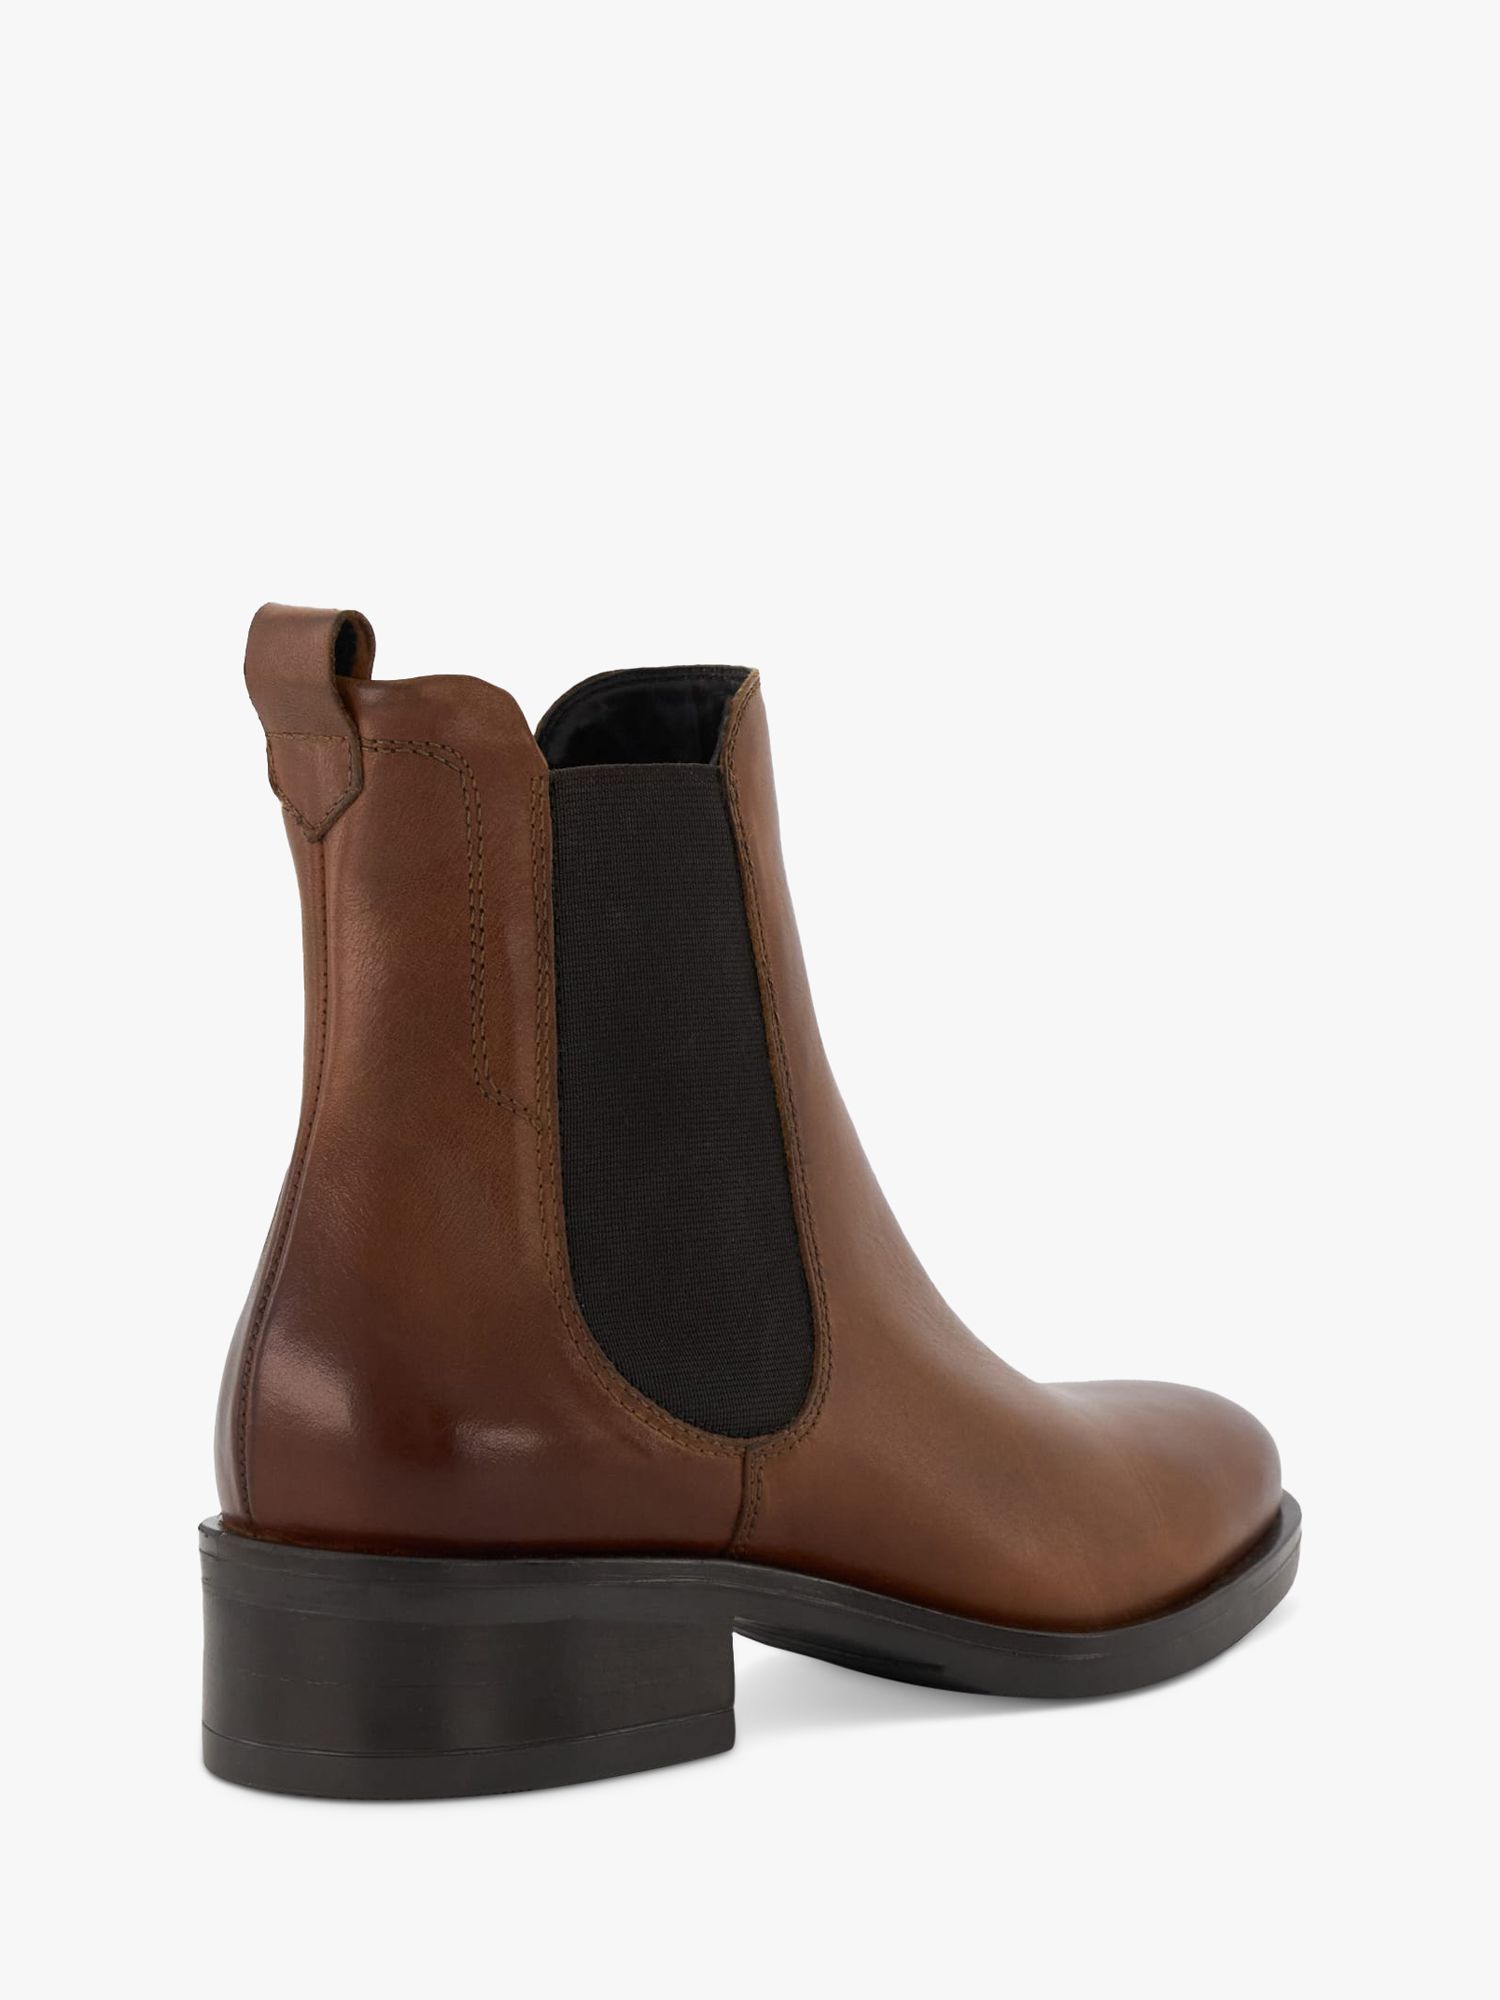 Buy Dune Panoramic Leather Chelsea Boots Online at johnlewis.com